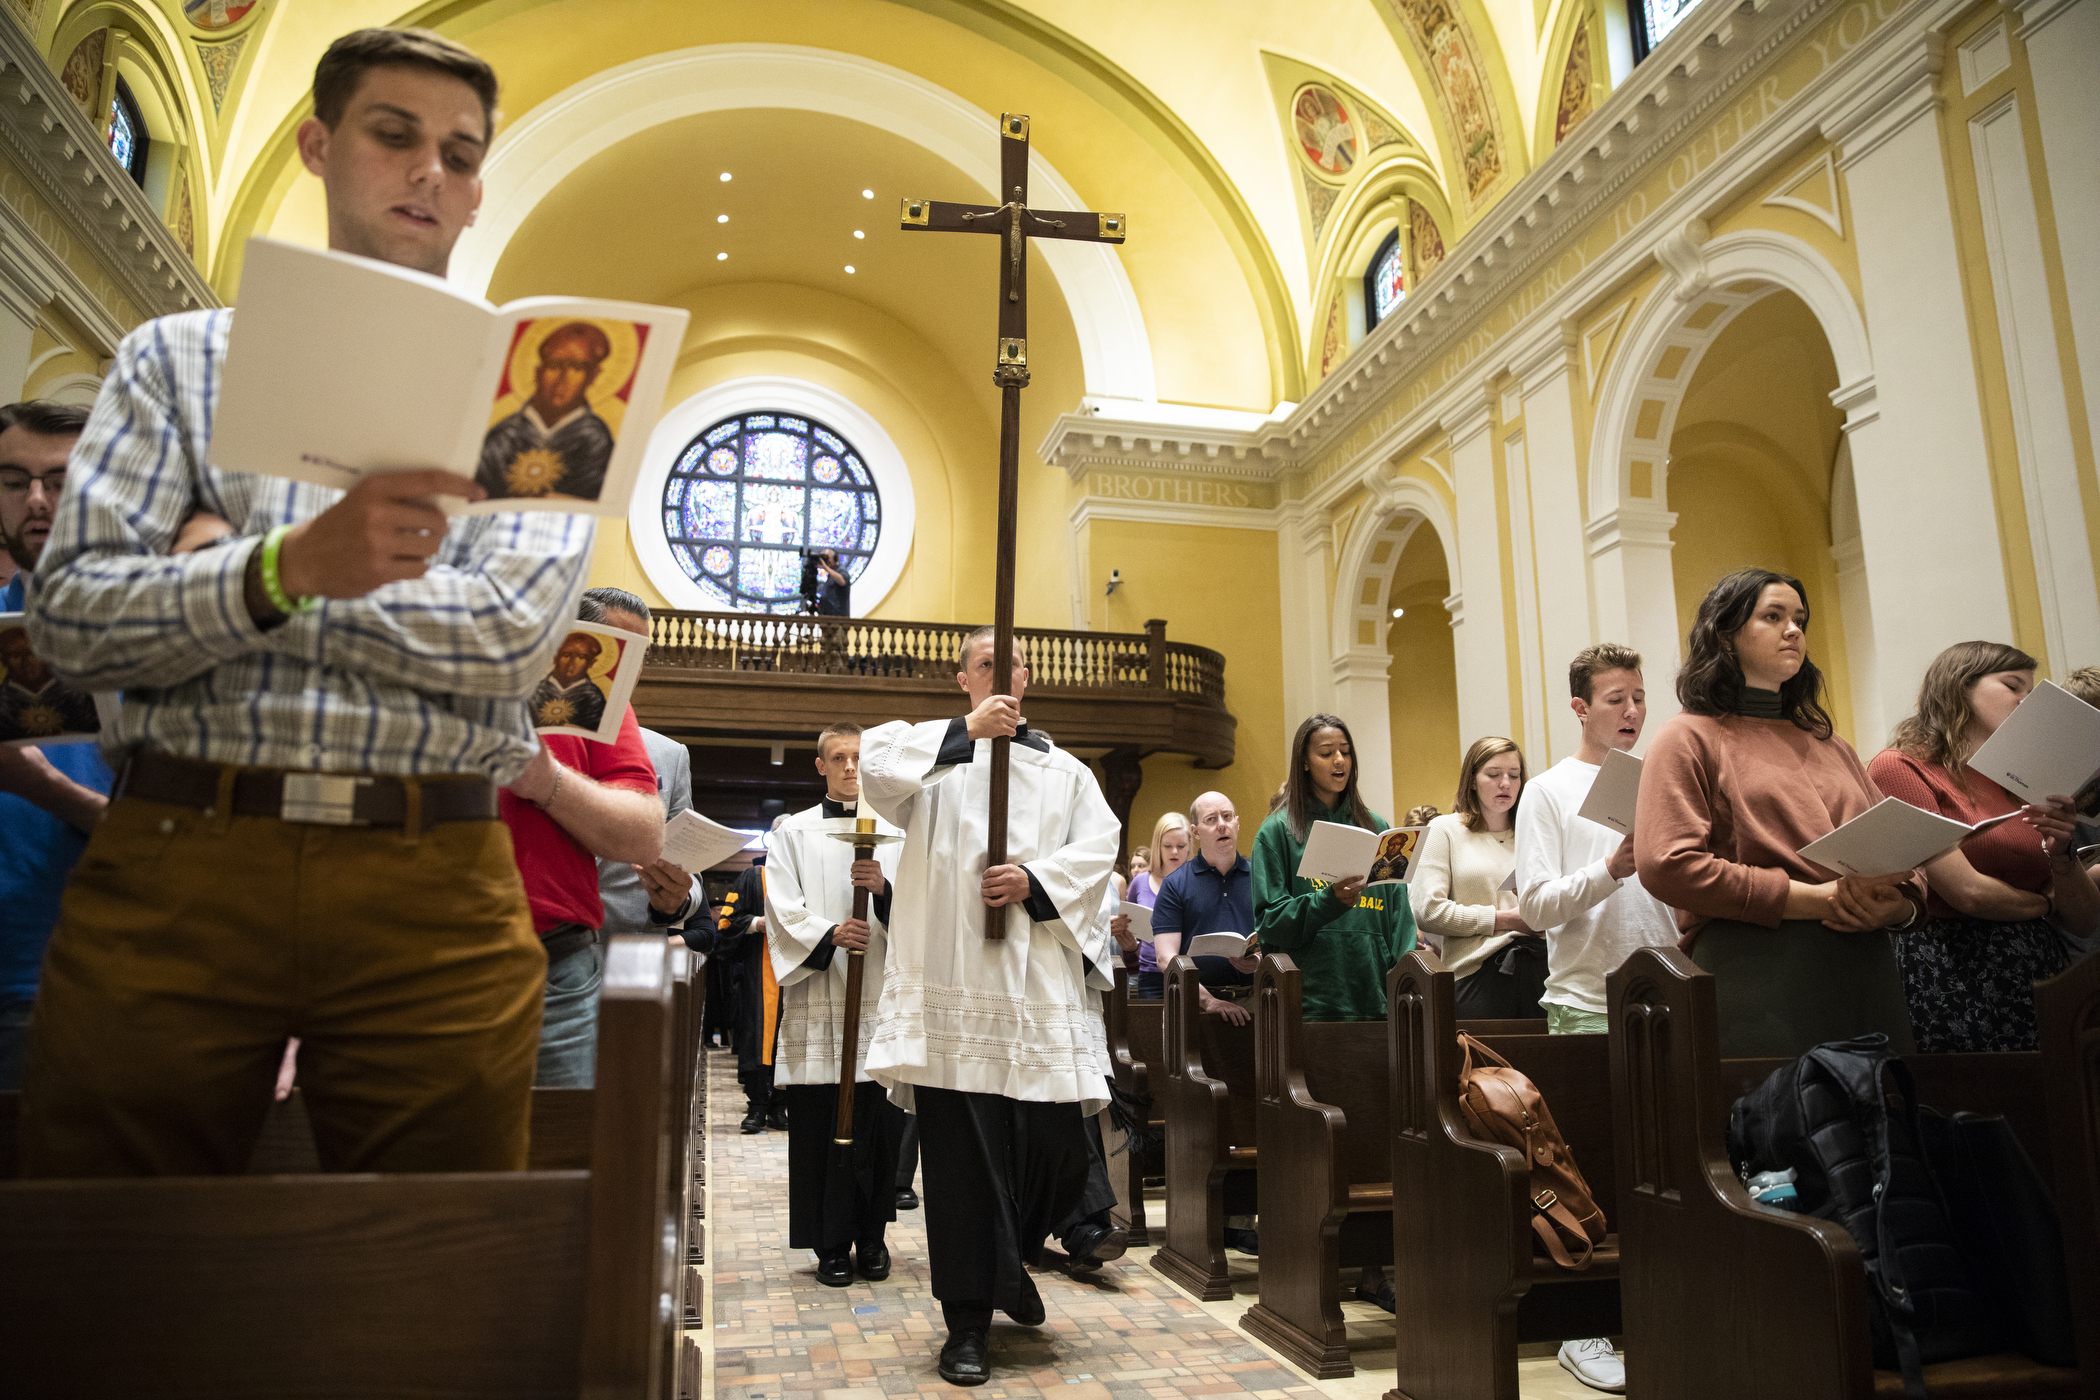 Students carry the cross during the Opening Mass Sept. 5, 2019 in the newly renovated interior of the Chapel of St. Thomas Aquinas.